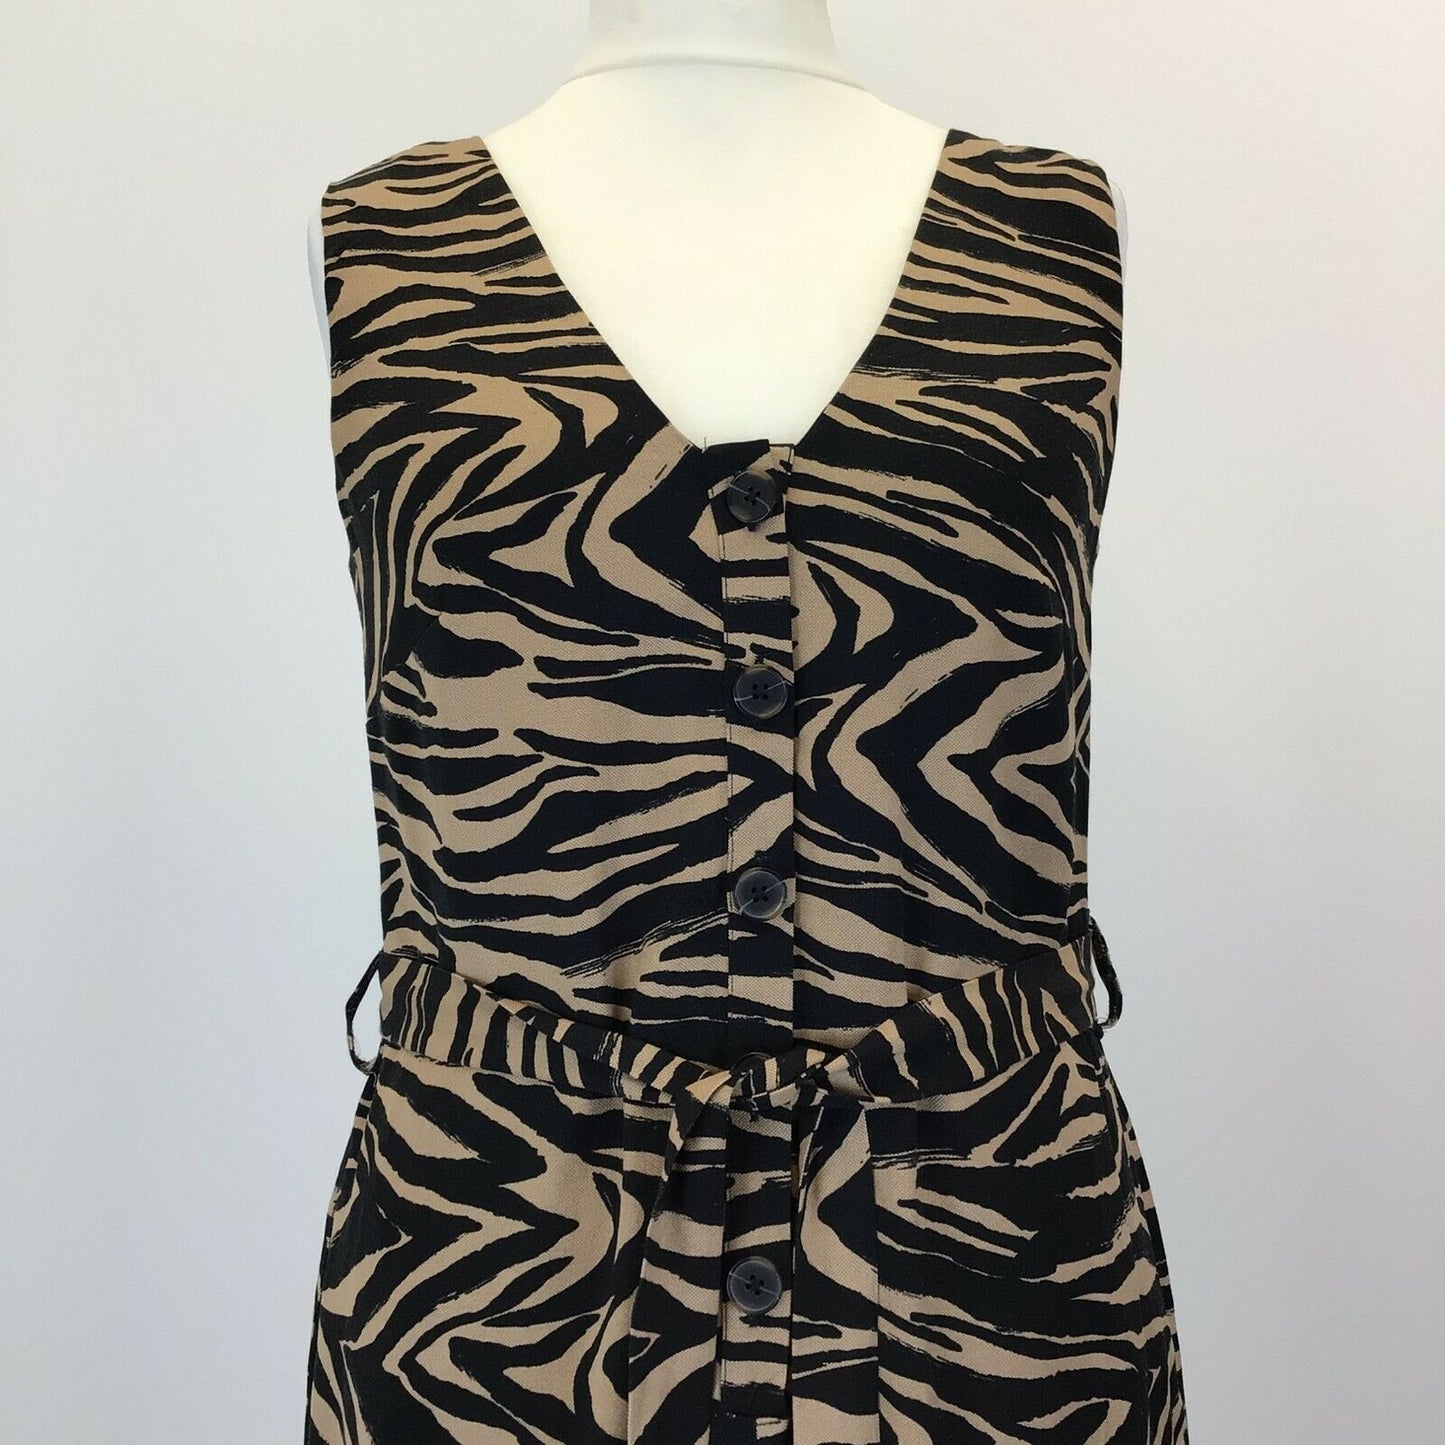 NEXT TAILORING Black and Brown Zebra Print Jumpsuit Size 8